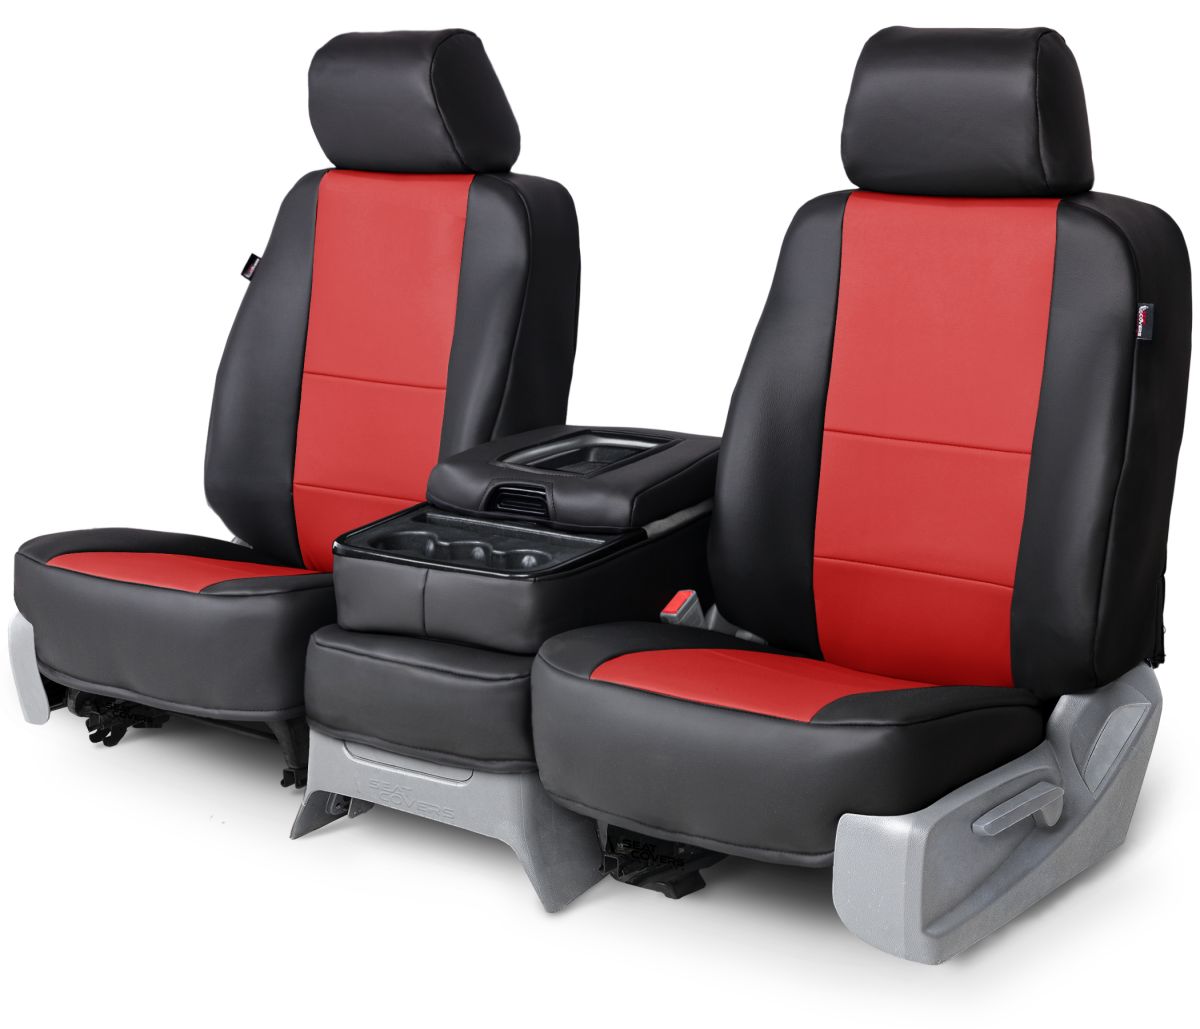 https://www.seatcoversunlimited.com/images/seatcovers/leatherette/main/Leatherette-Black_and_Red-1200.jpg